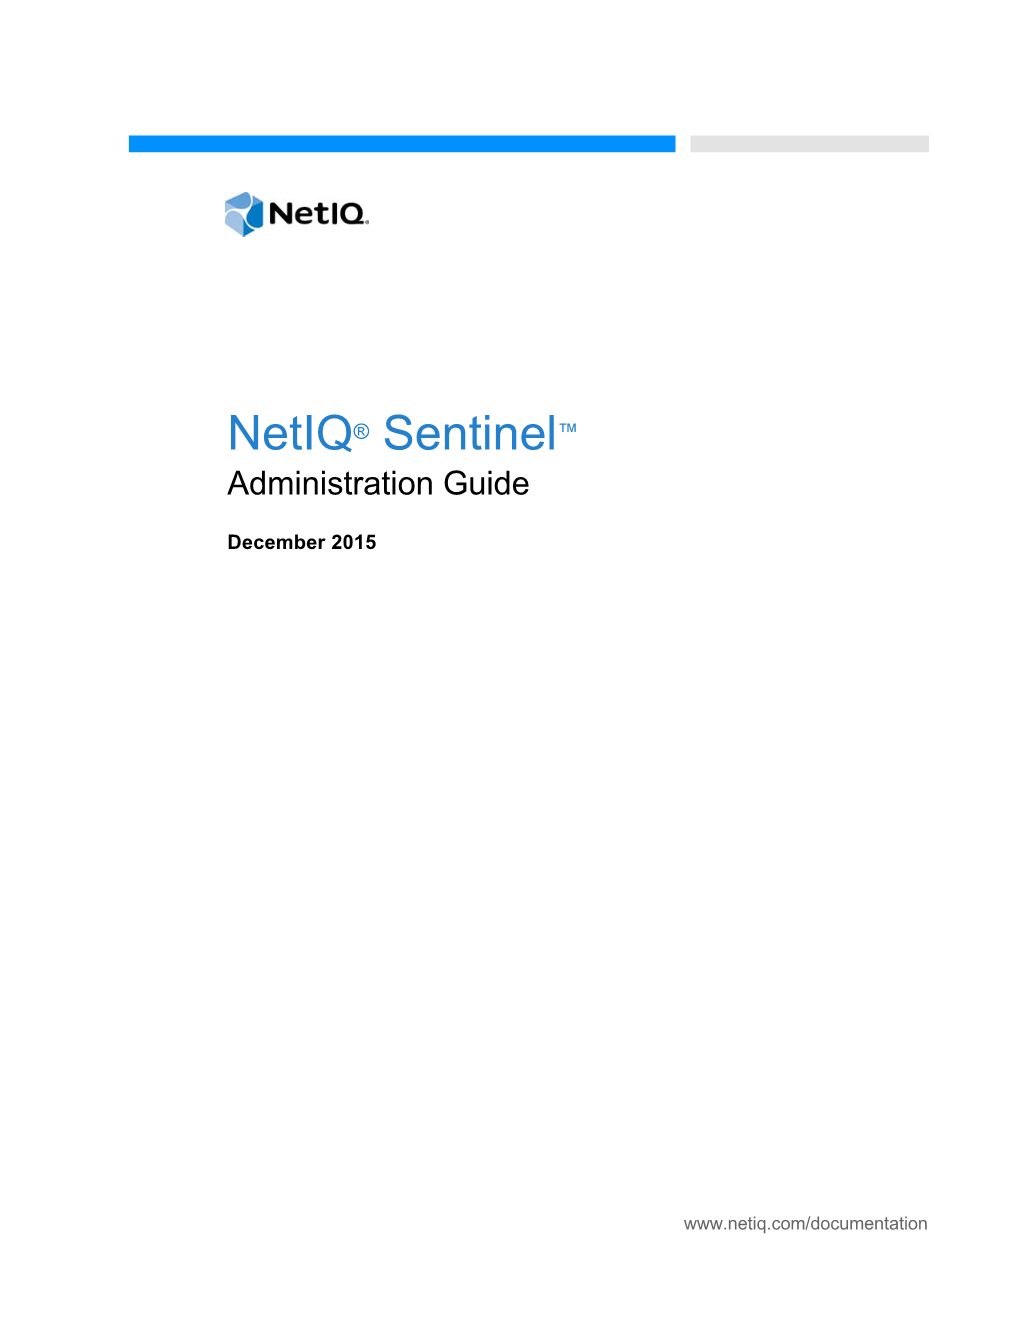 Netiq Sentinel Administration Guide 7.4.2 Viewing Data in Event Source Management